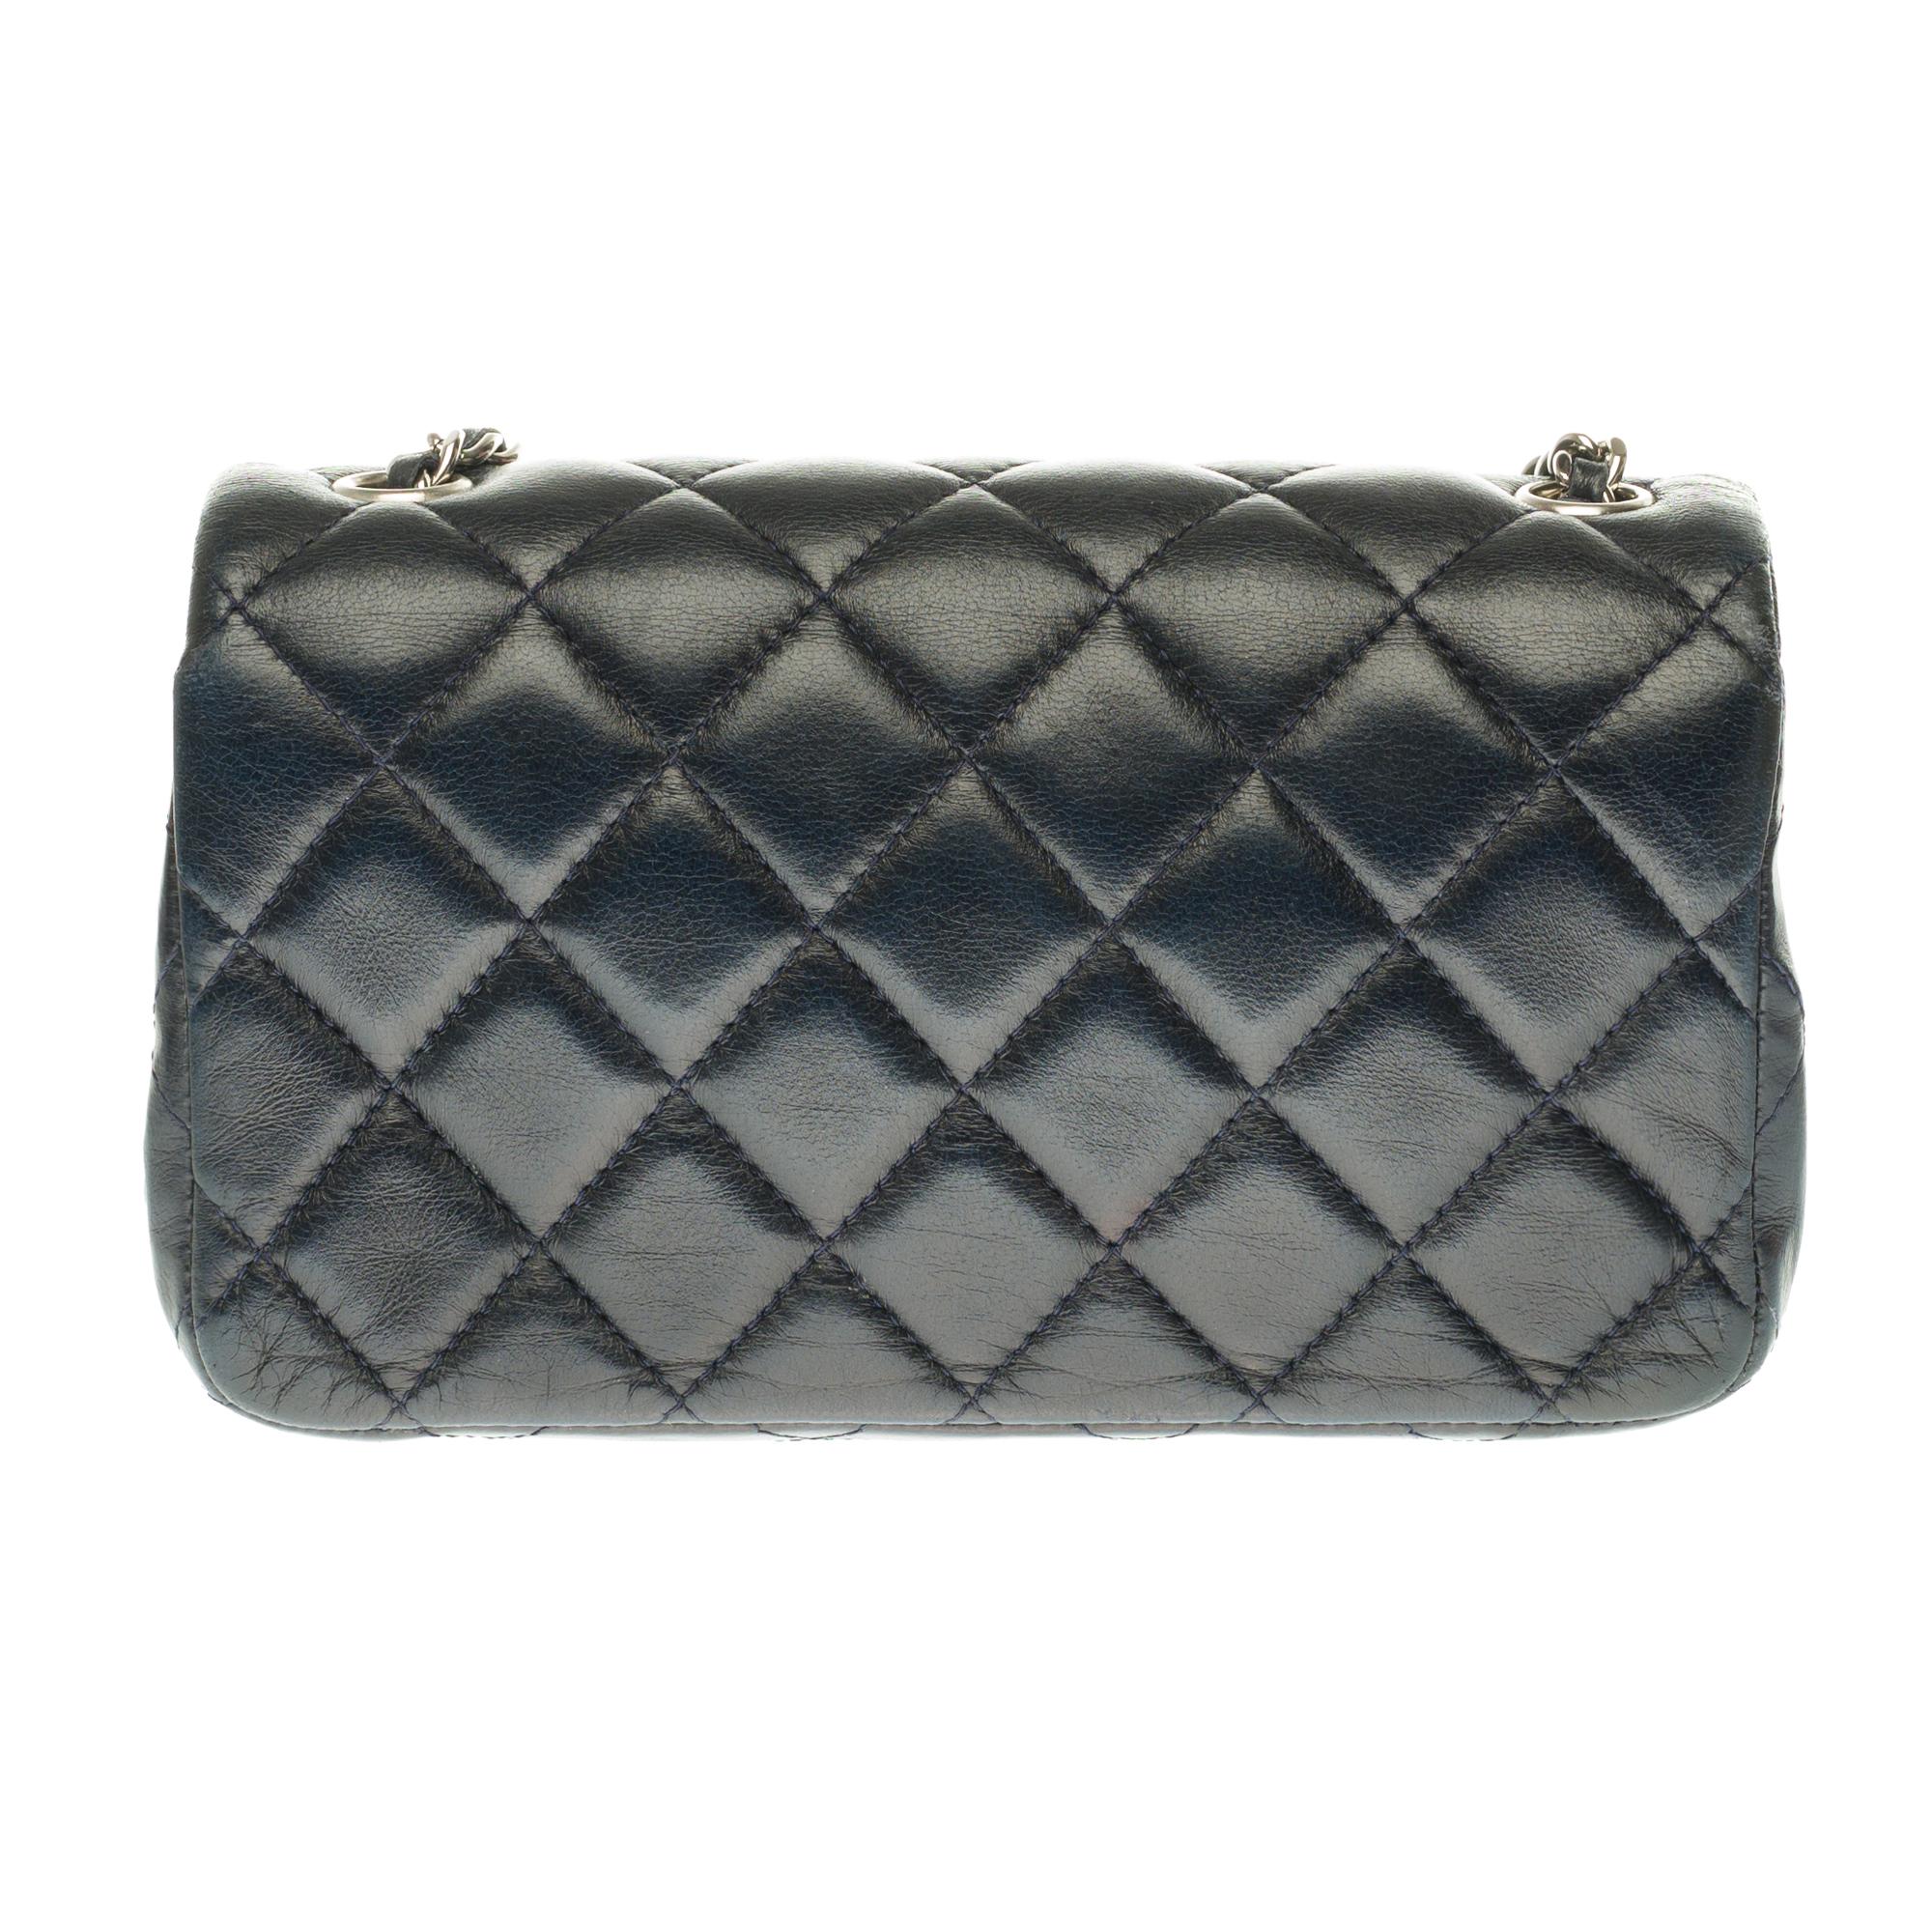 Gorgeous Chanel Timeless extra Mini rectangle in navy blue quilted leather, silver metal chain handle intertwined with night blue leather allowing a hand or shoulder or shoulder strap.

Silver metal flap closure.
Lining in navy blue